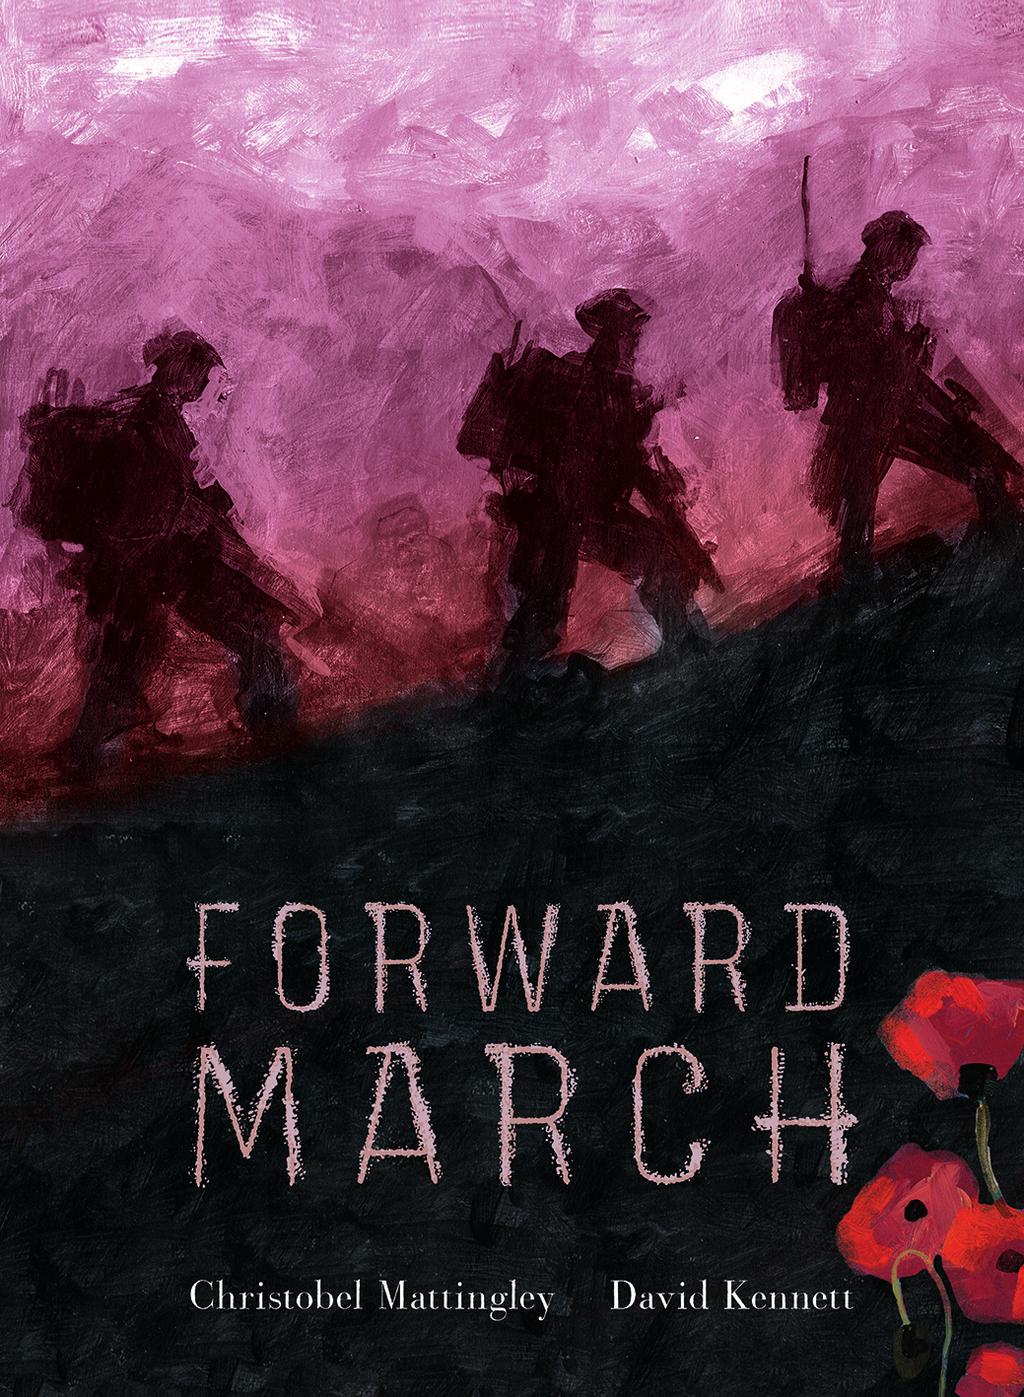 Teachers Notes Forward March OMNIBUS BOOKS Written by Christobel Mattingley Illustrated by David Kennett Teachers Notes by Rae Carlyle OMNIBUS BOOKS Contents Category Picture Book Title Forward March